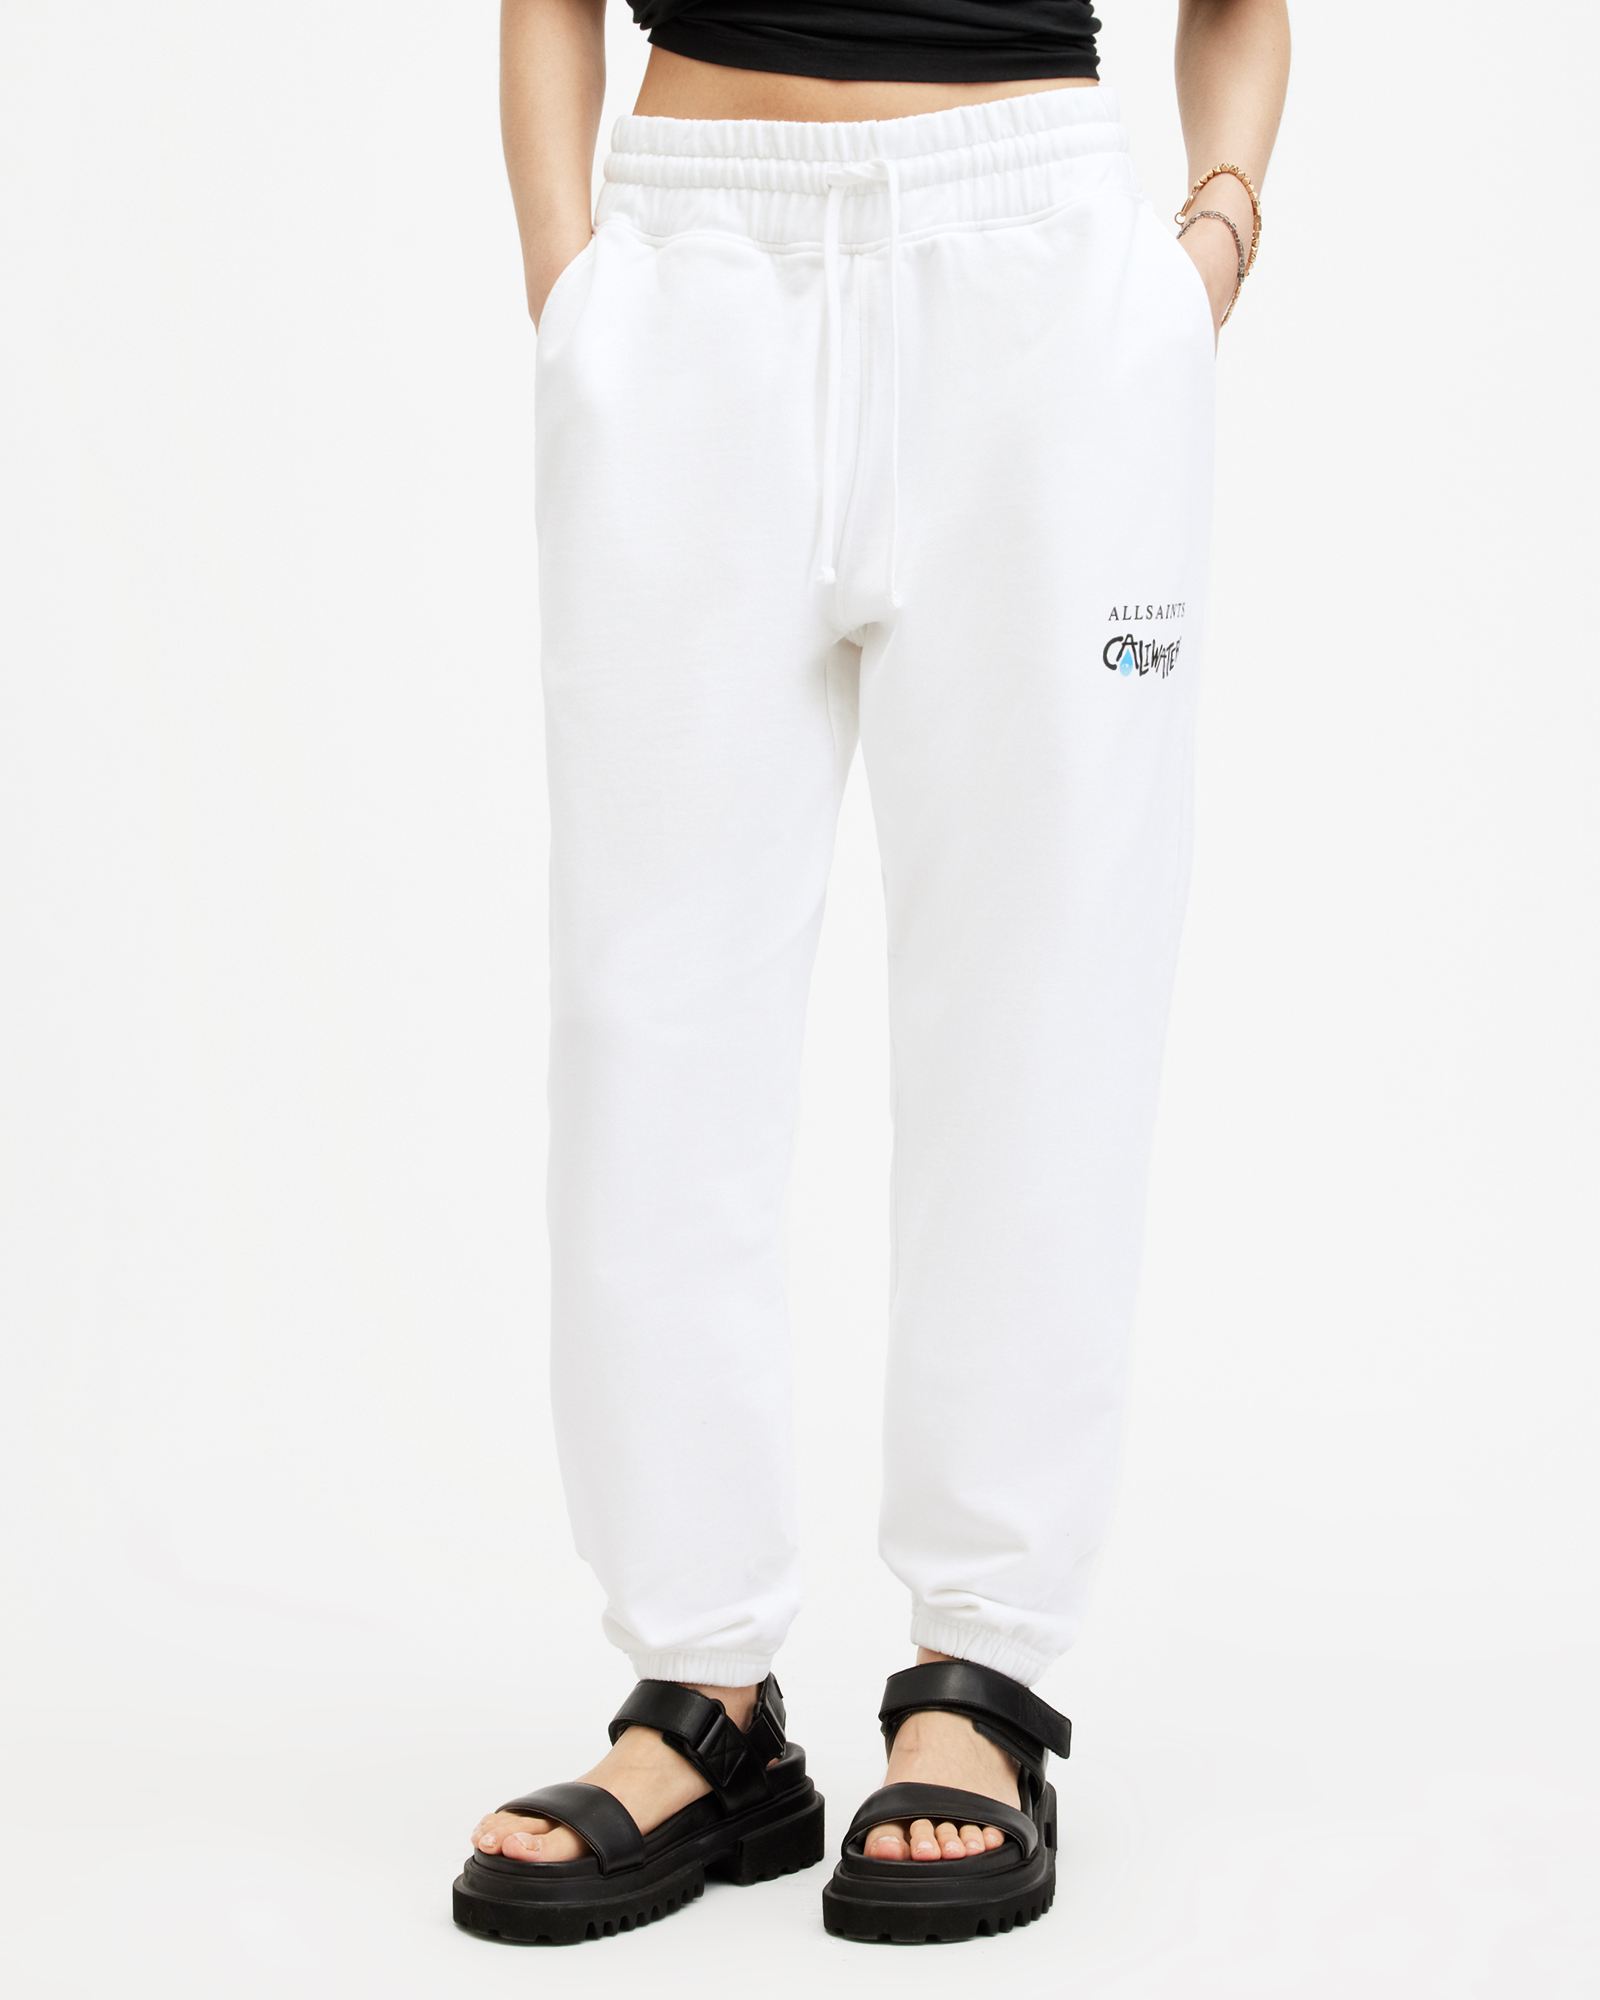 AllSaints Caliwater Relaxed Fit Sweatpants